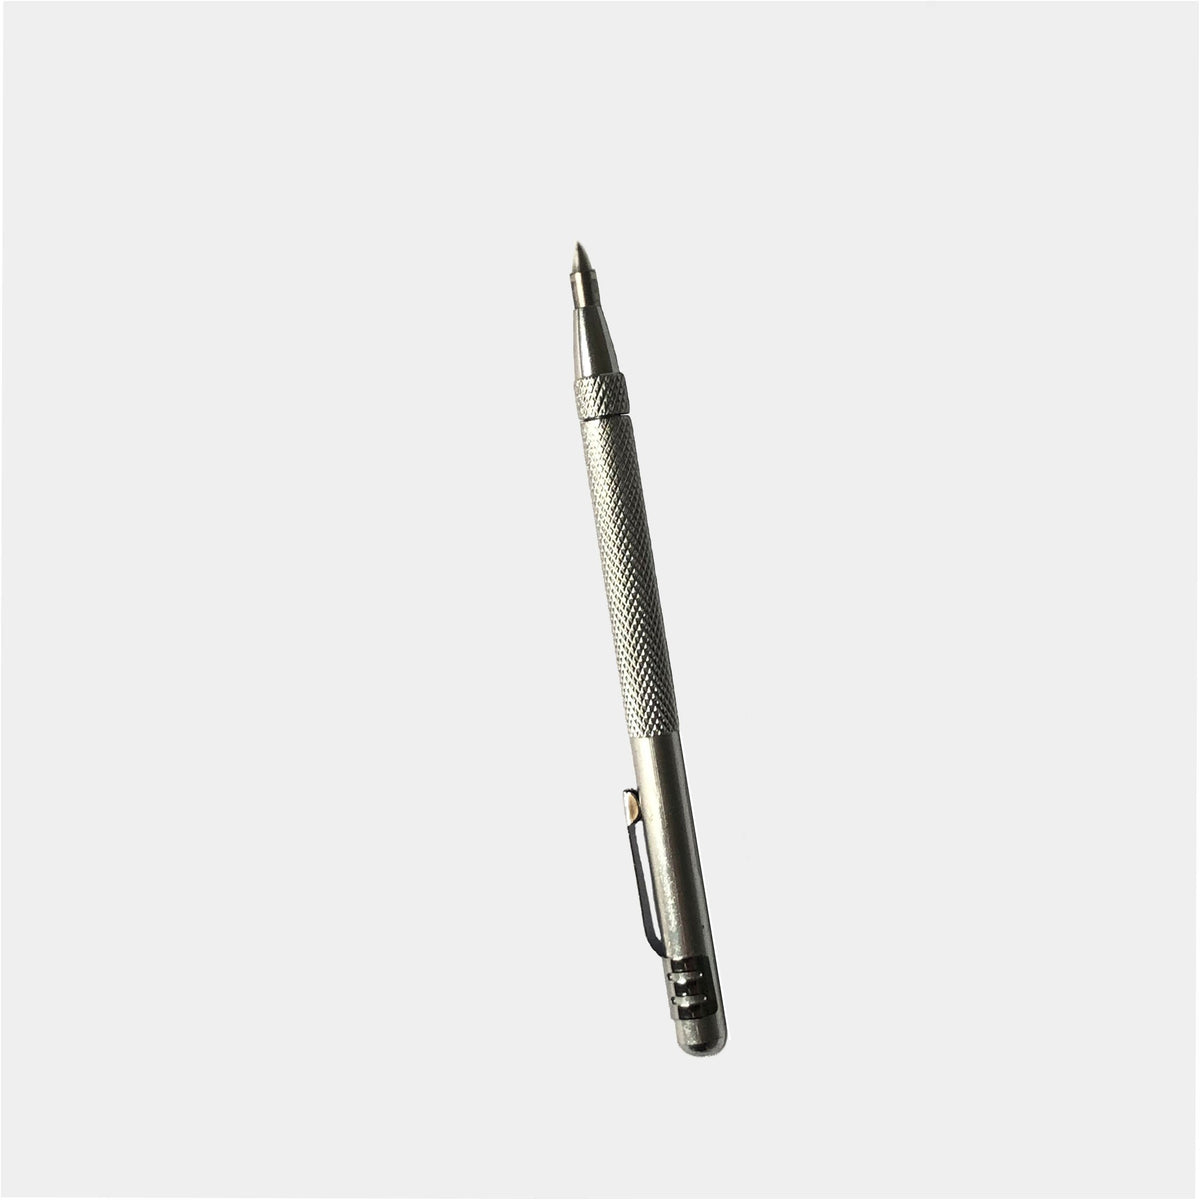 Carbide Scribe, Steel Casing, 4-3/4 Inches